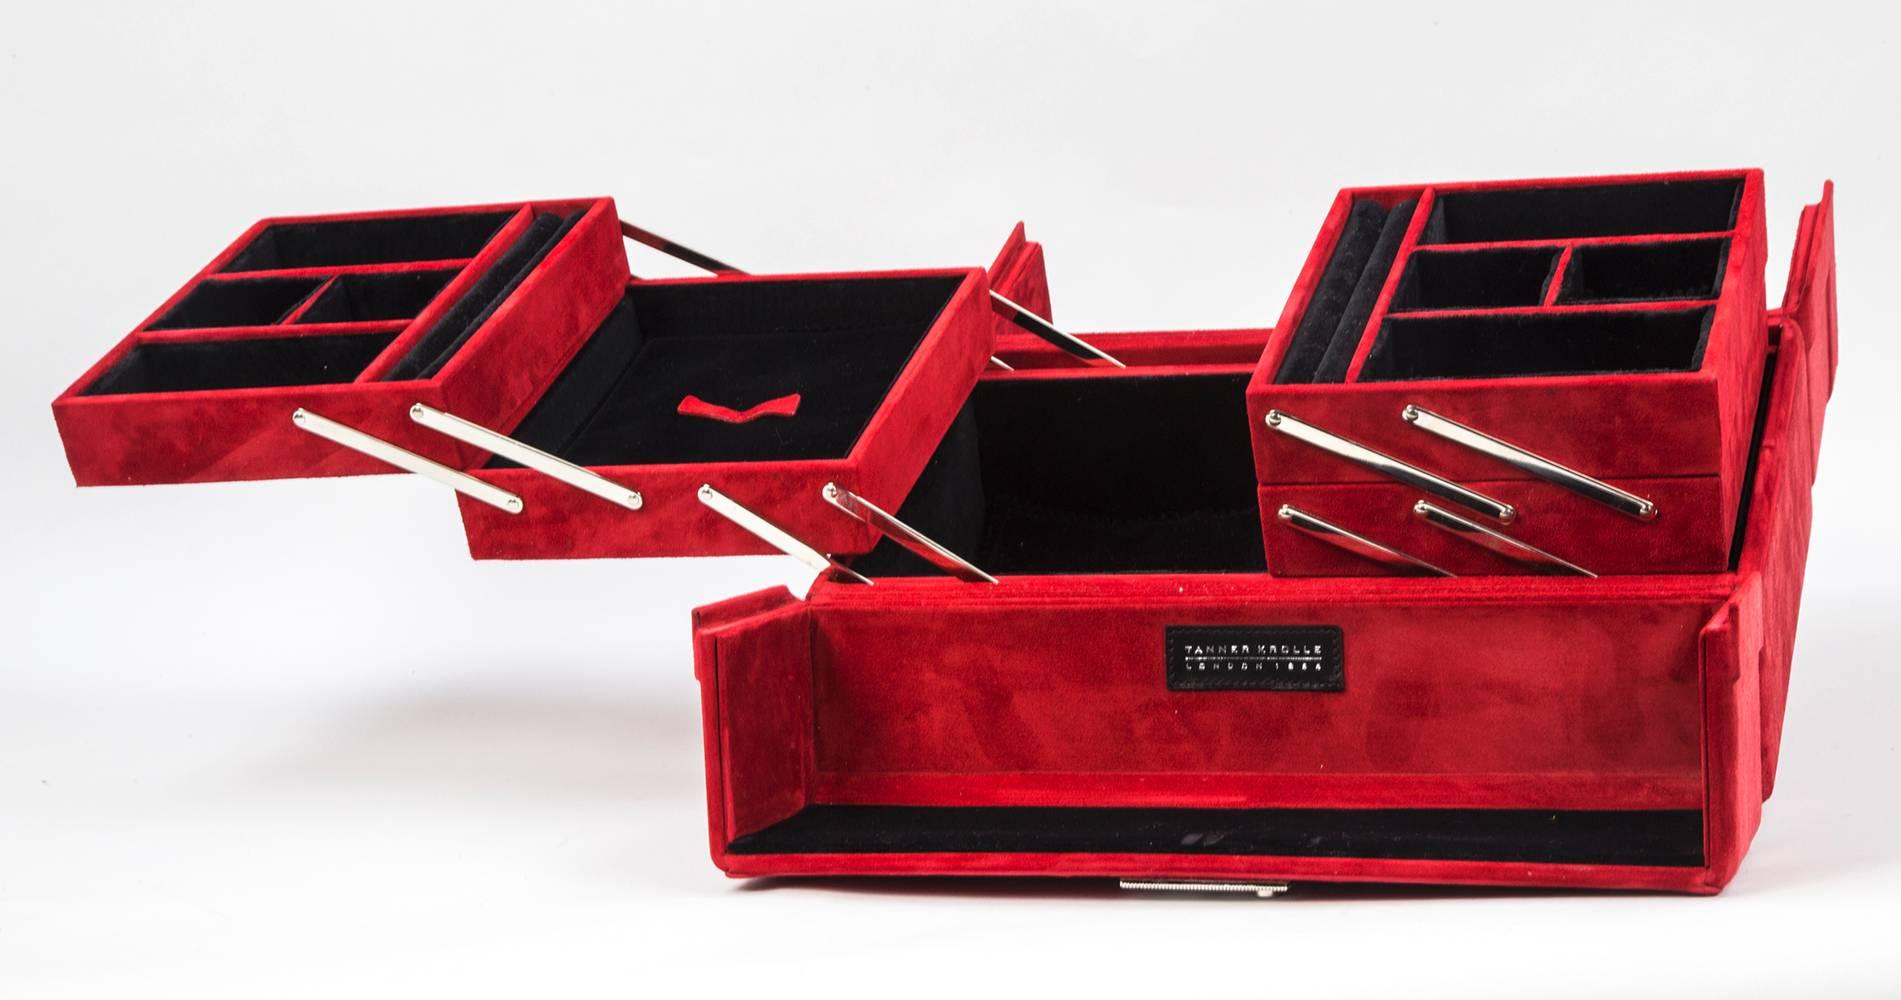 Curating luxury with a magnificent Tanner Krolle large red suede jewelry case, fully lined in black suede leather; comes with Tanner Krolle large white protection bag; The grandest luggage money can buy…It's a British firm called Tanner Krolle.